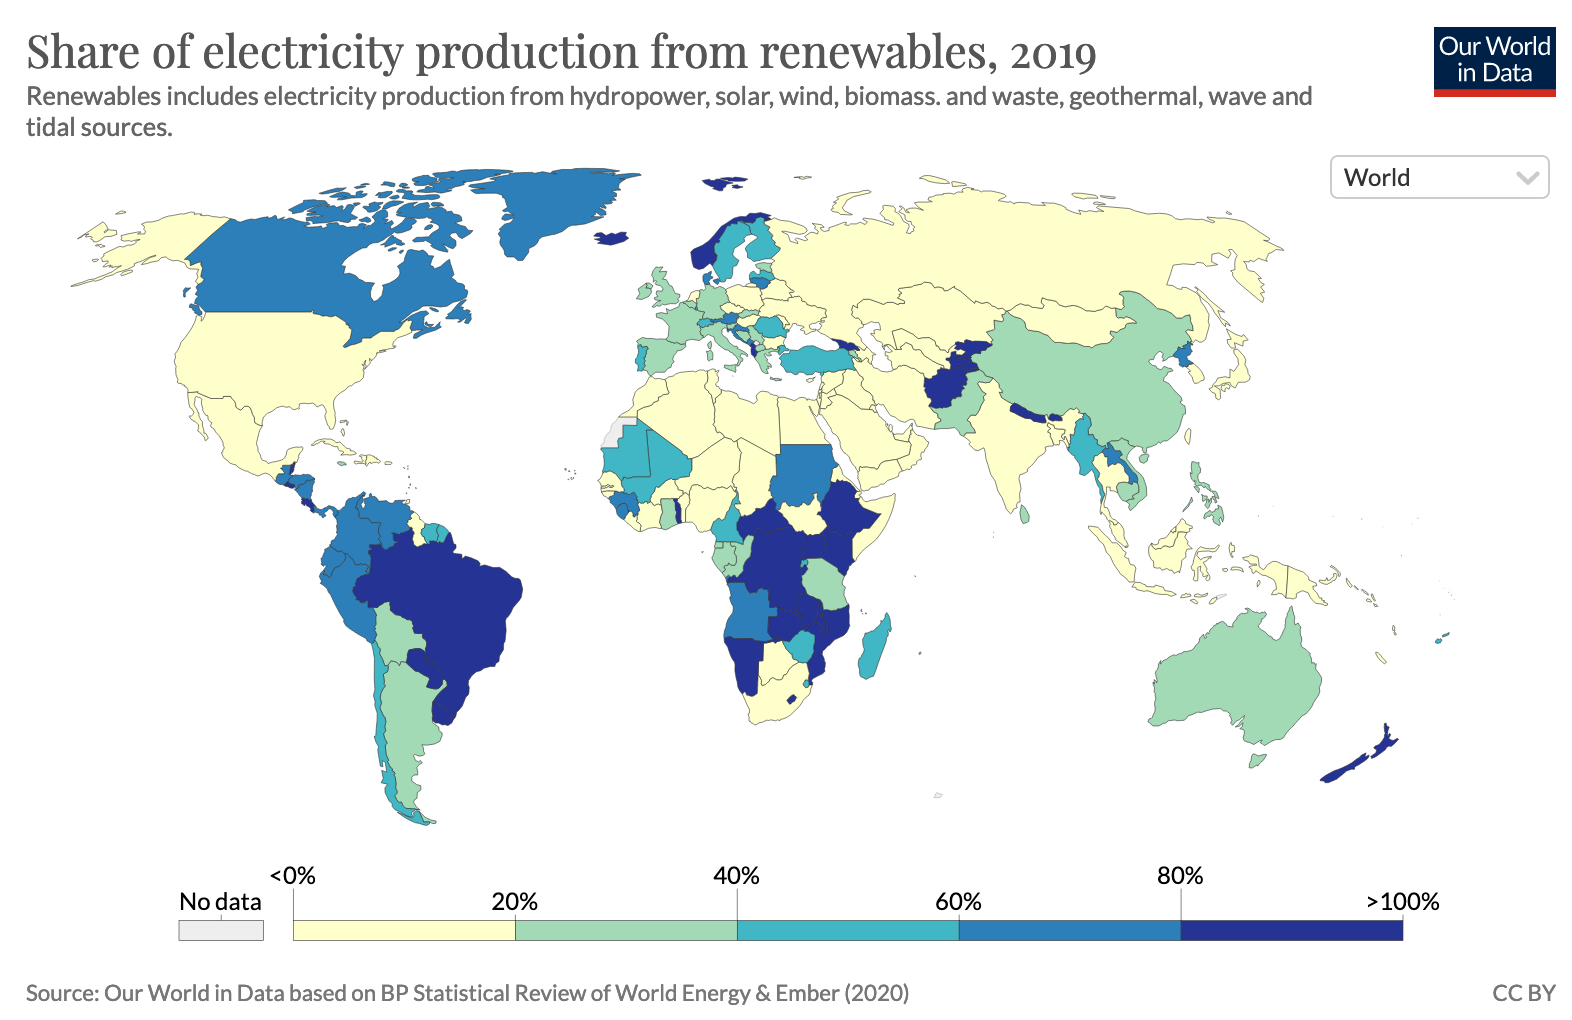 How much of the worlds energy comes from renewable sources. 0-20% (Example: United States, Russia, India), 20-40% (Example: Argentina, China, Australia, France), 40-60% (Example: Sweden, Finland, Turkey), 60-80% (Example: Canada, Sudan, Peru), 80-100% (Example: Norway, Iceland, Brasil, Pakistan)